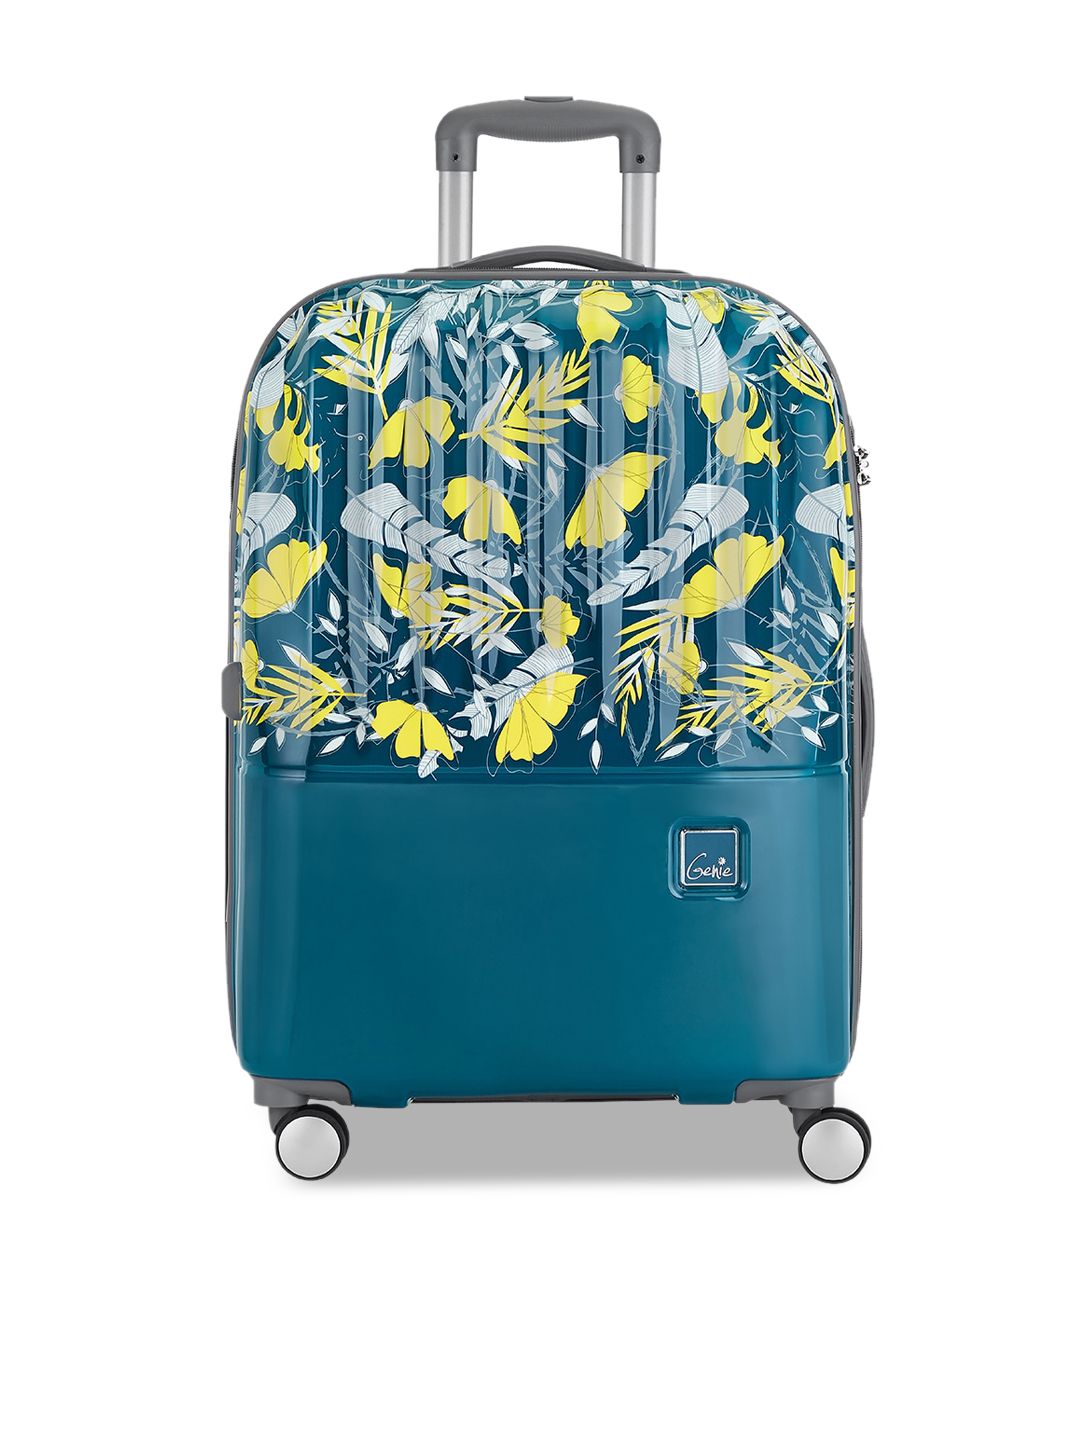 Genie Navy Blue Printed Hard Sided Large Trolley Suitcase Price in India